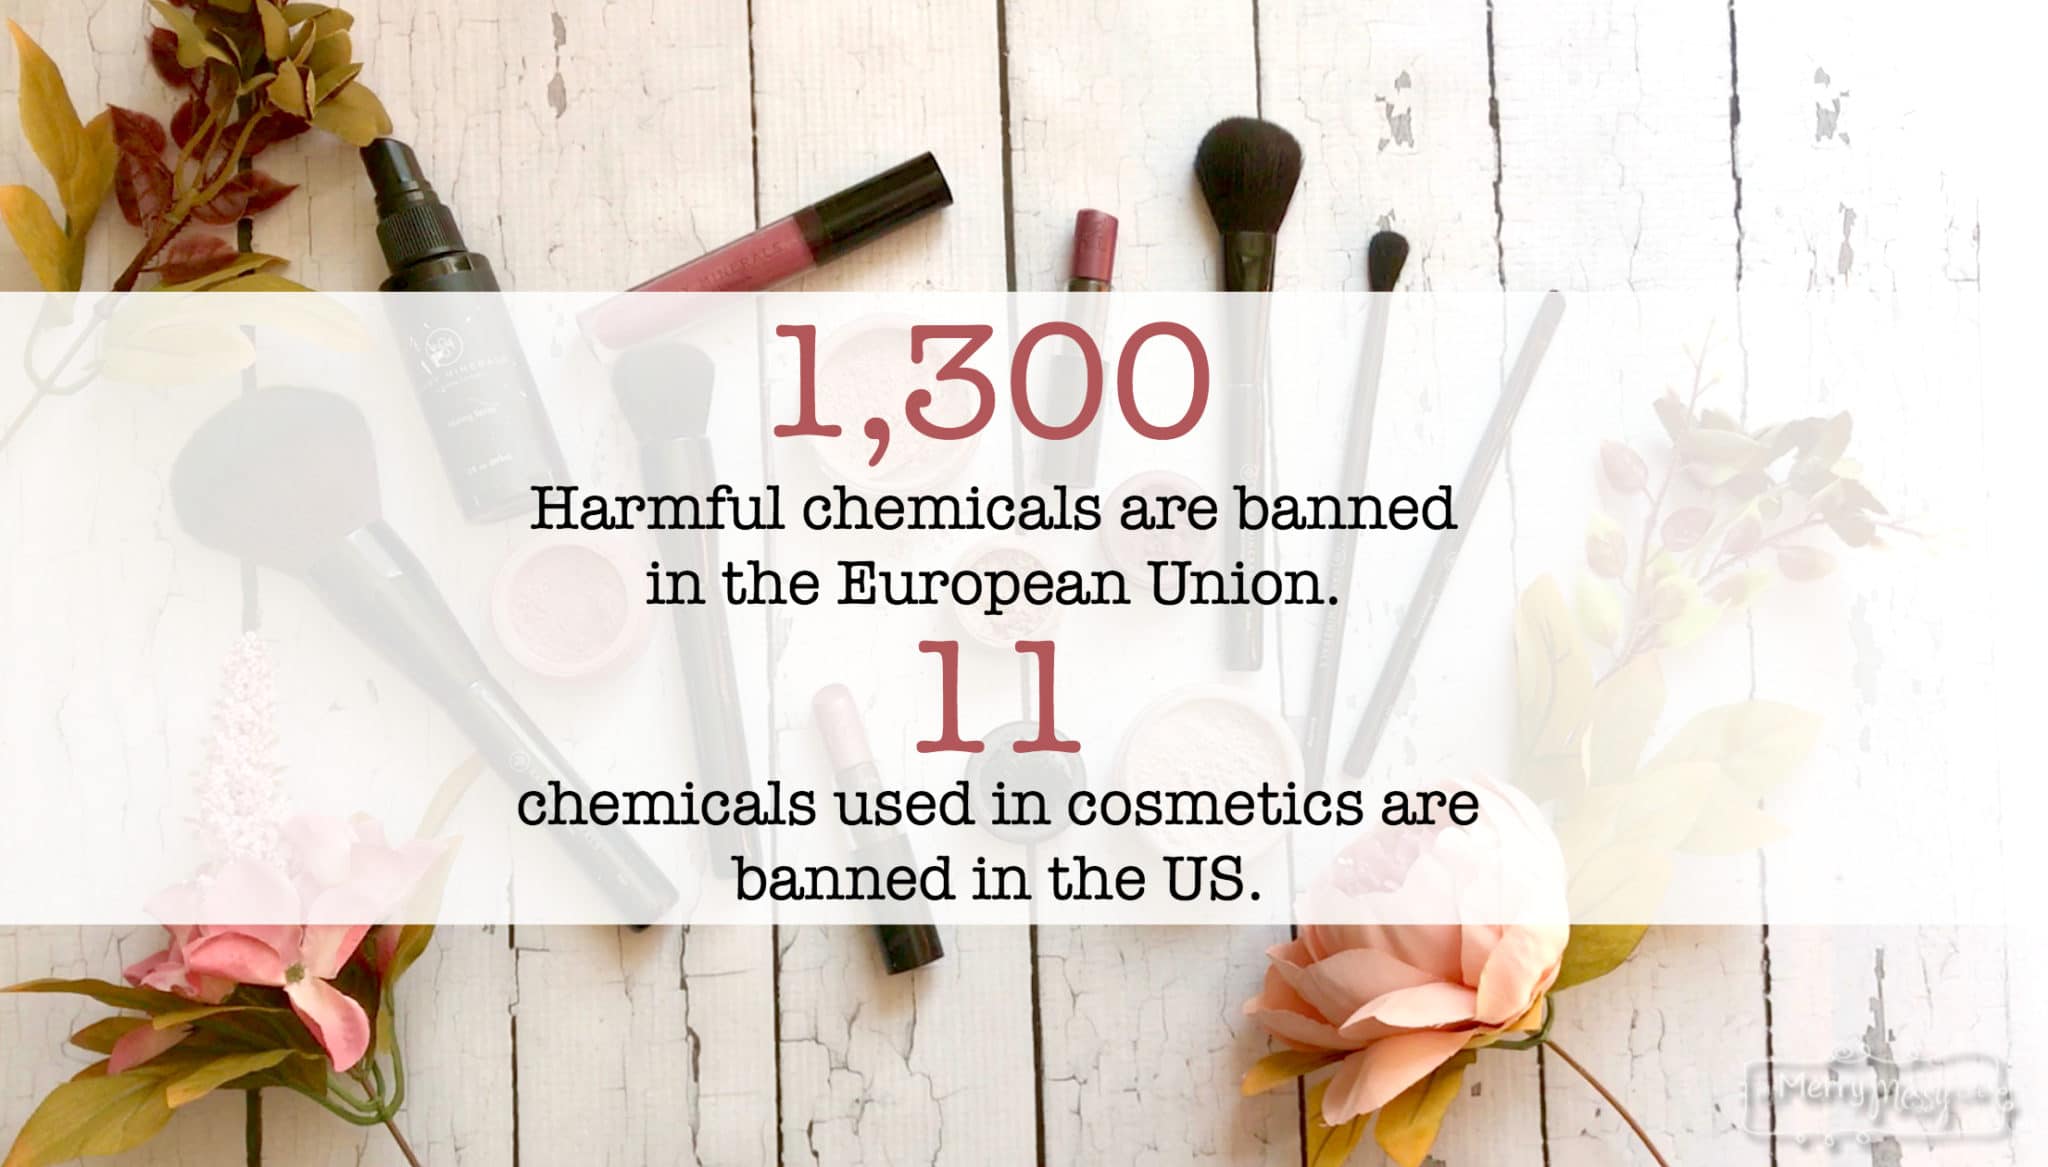 There are 1300 harmful chemicals banned in the European Union, only 11 are banned in the US